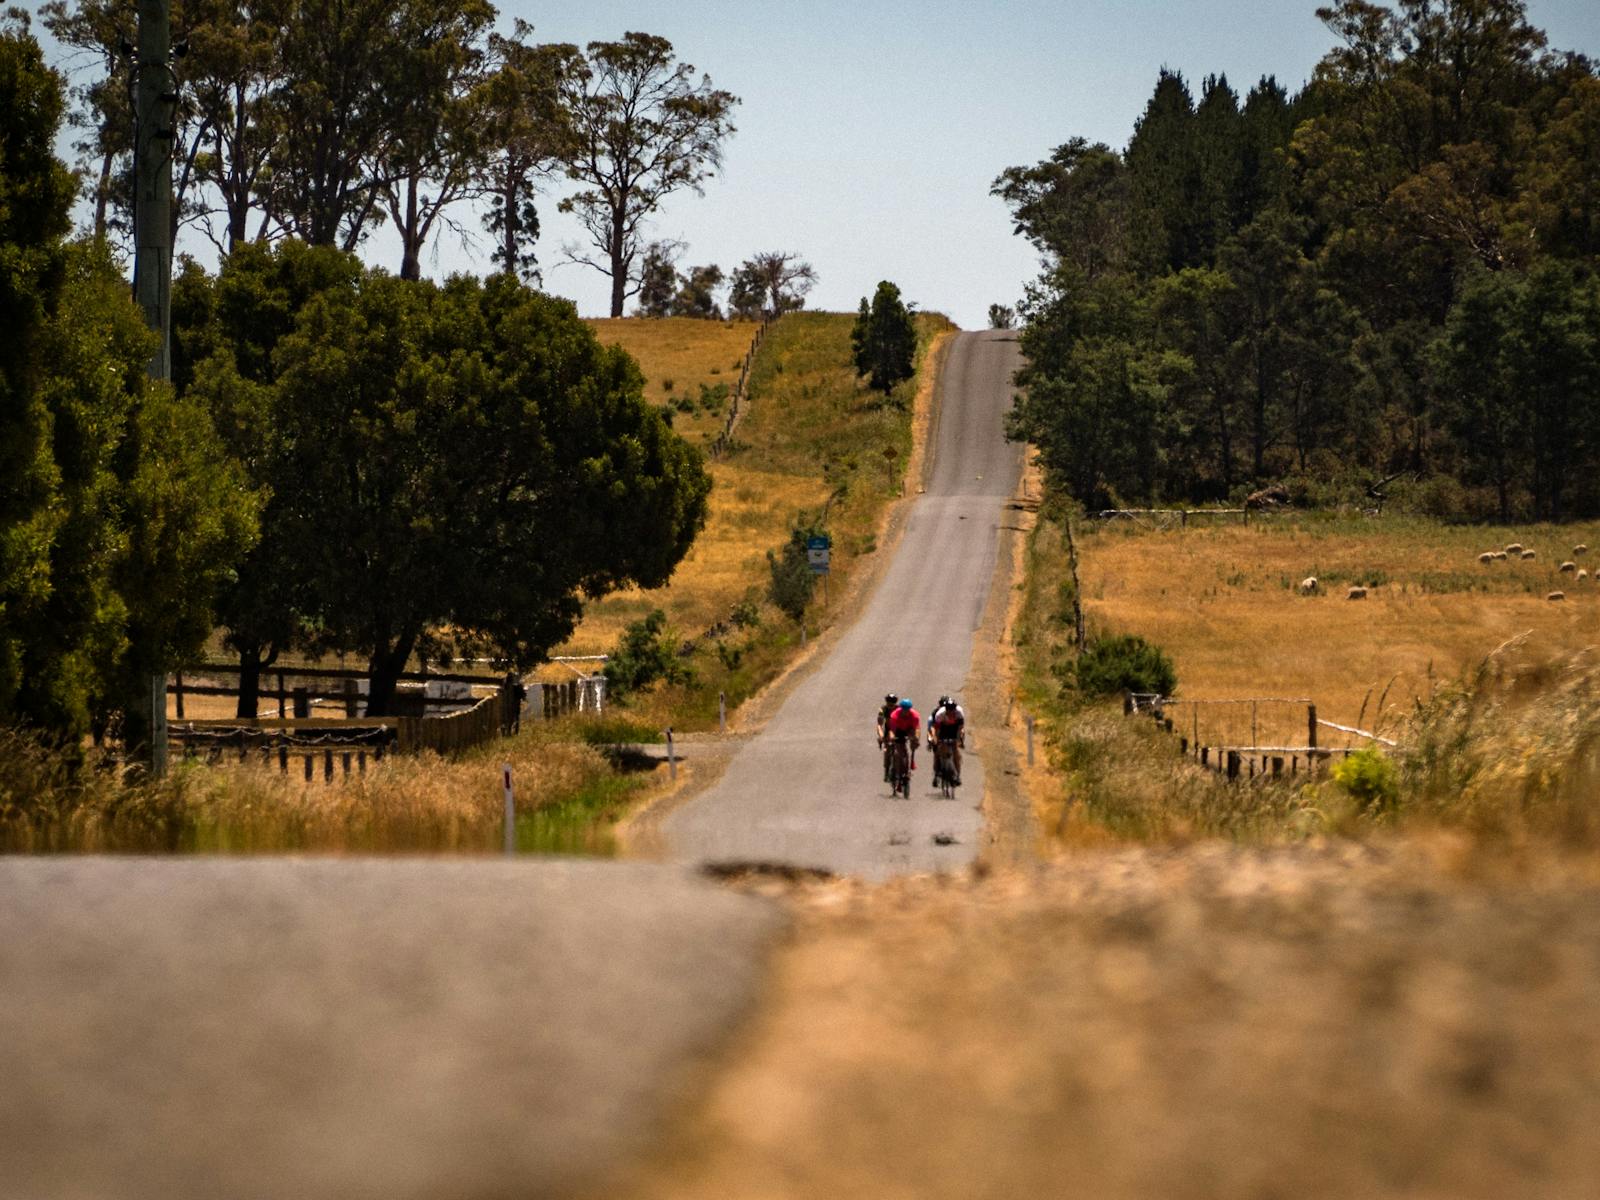 Cyclists on a country road